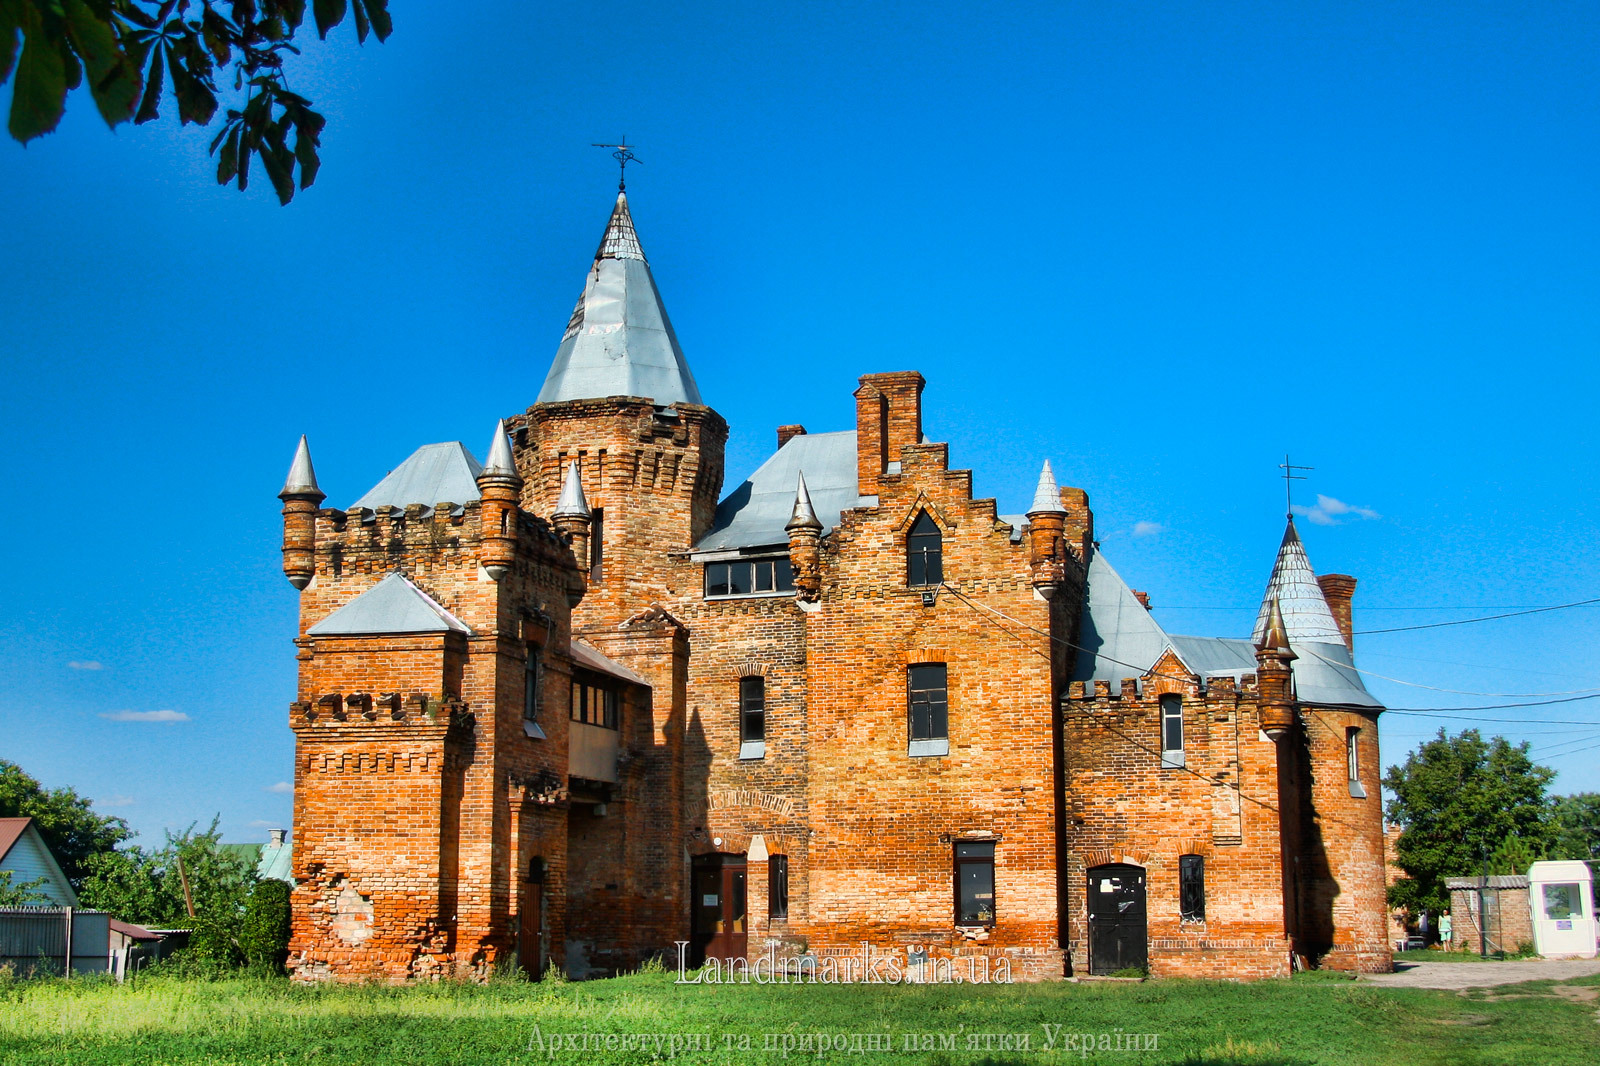 Popov Castle was built in the style of English castles